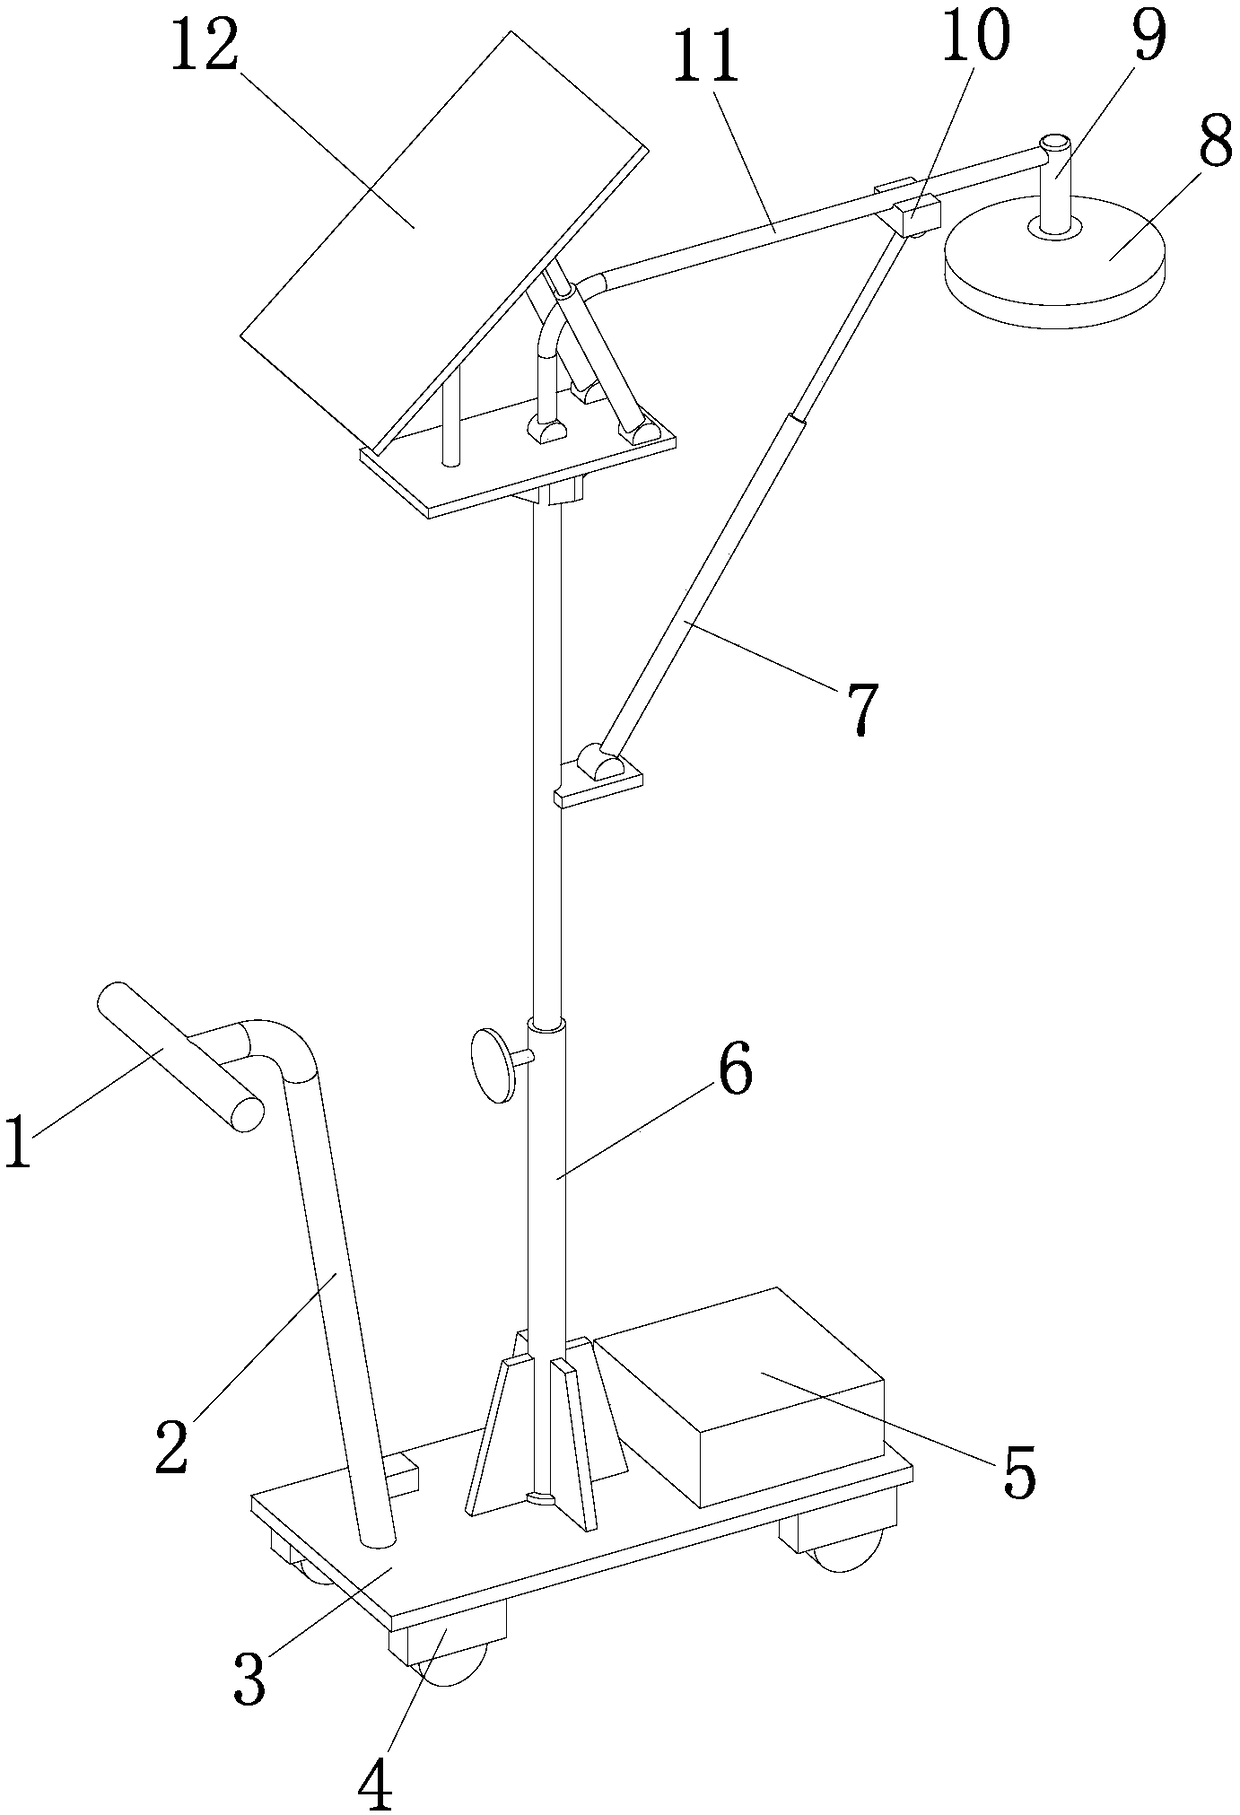 Yard lamp with function of adjusting angle of lamp pole support